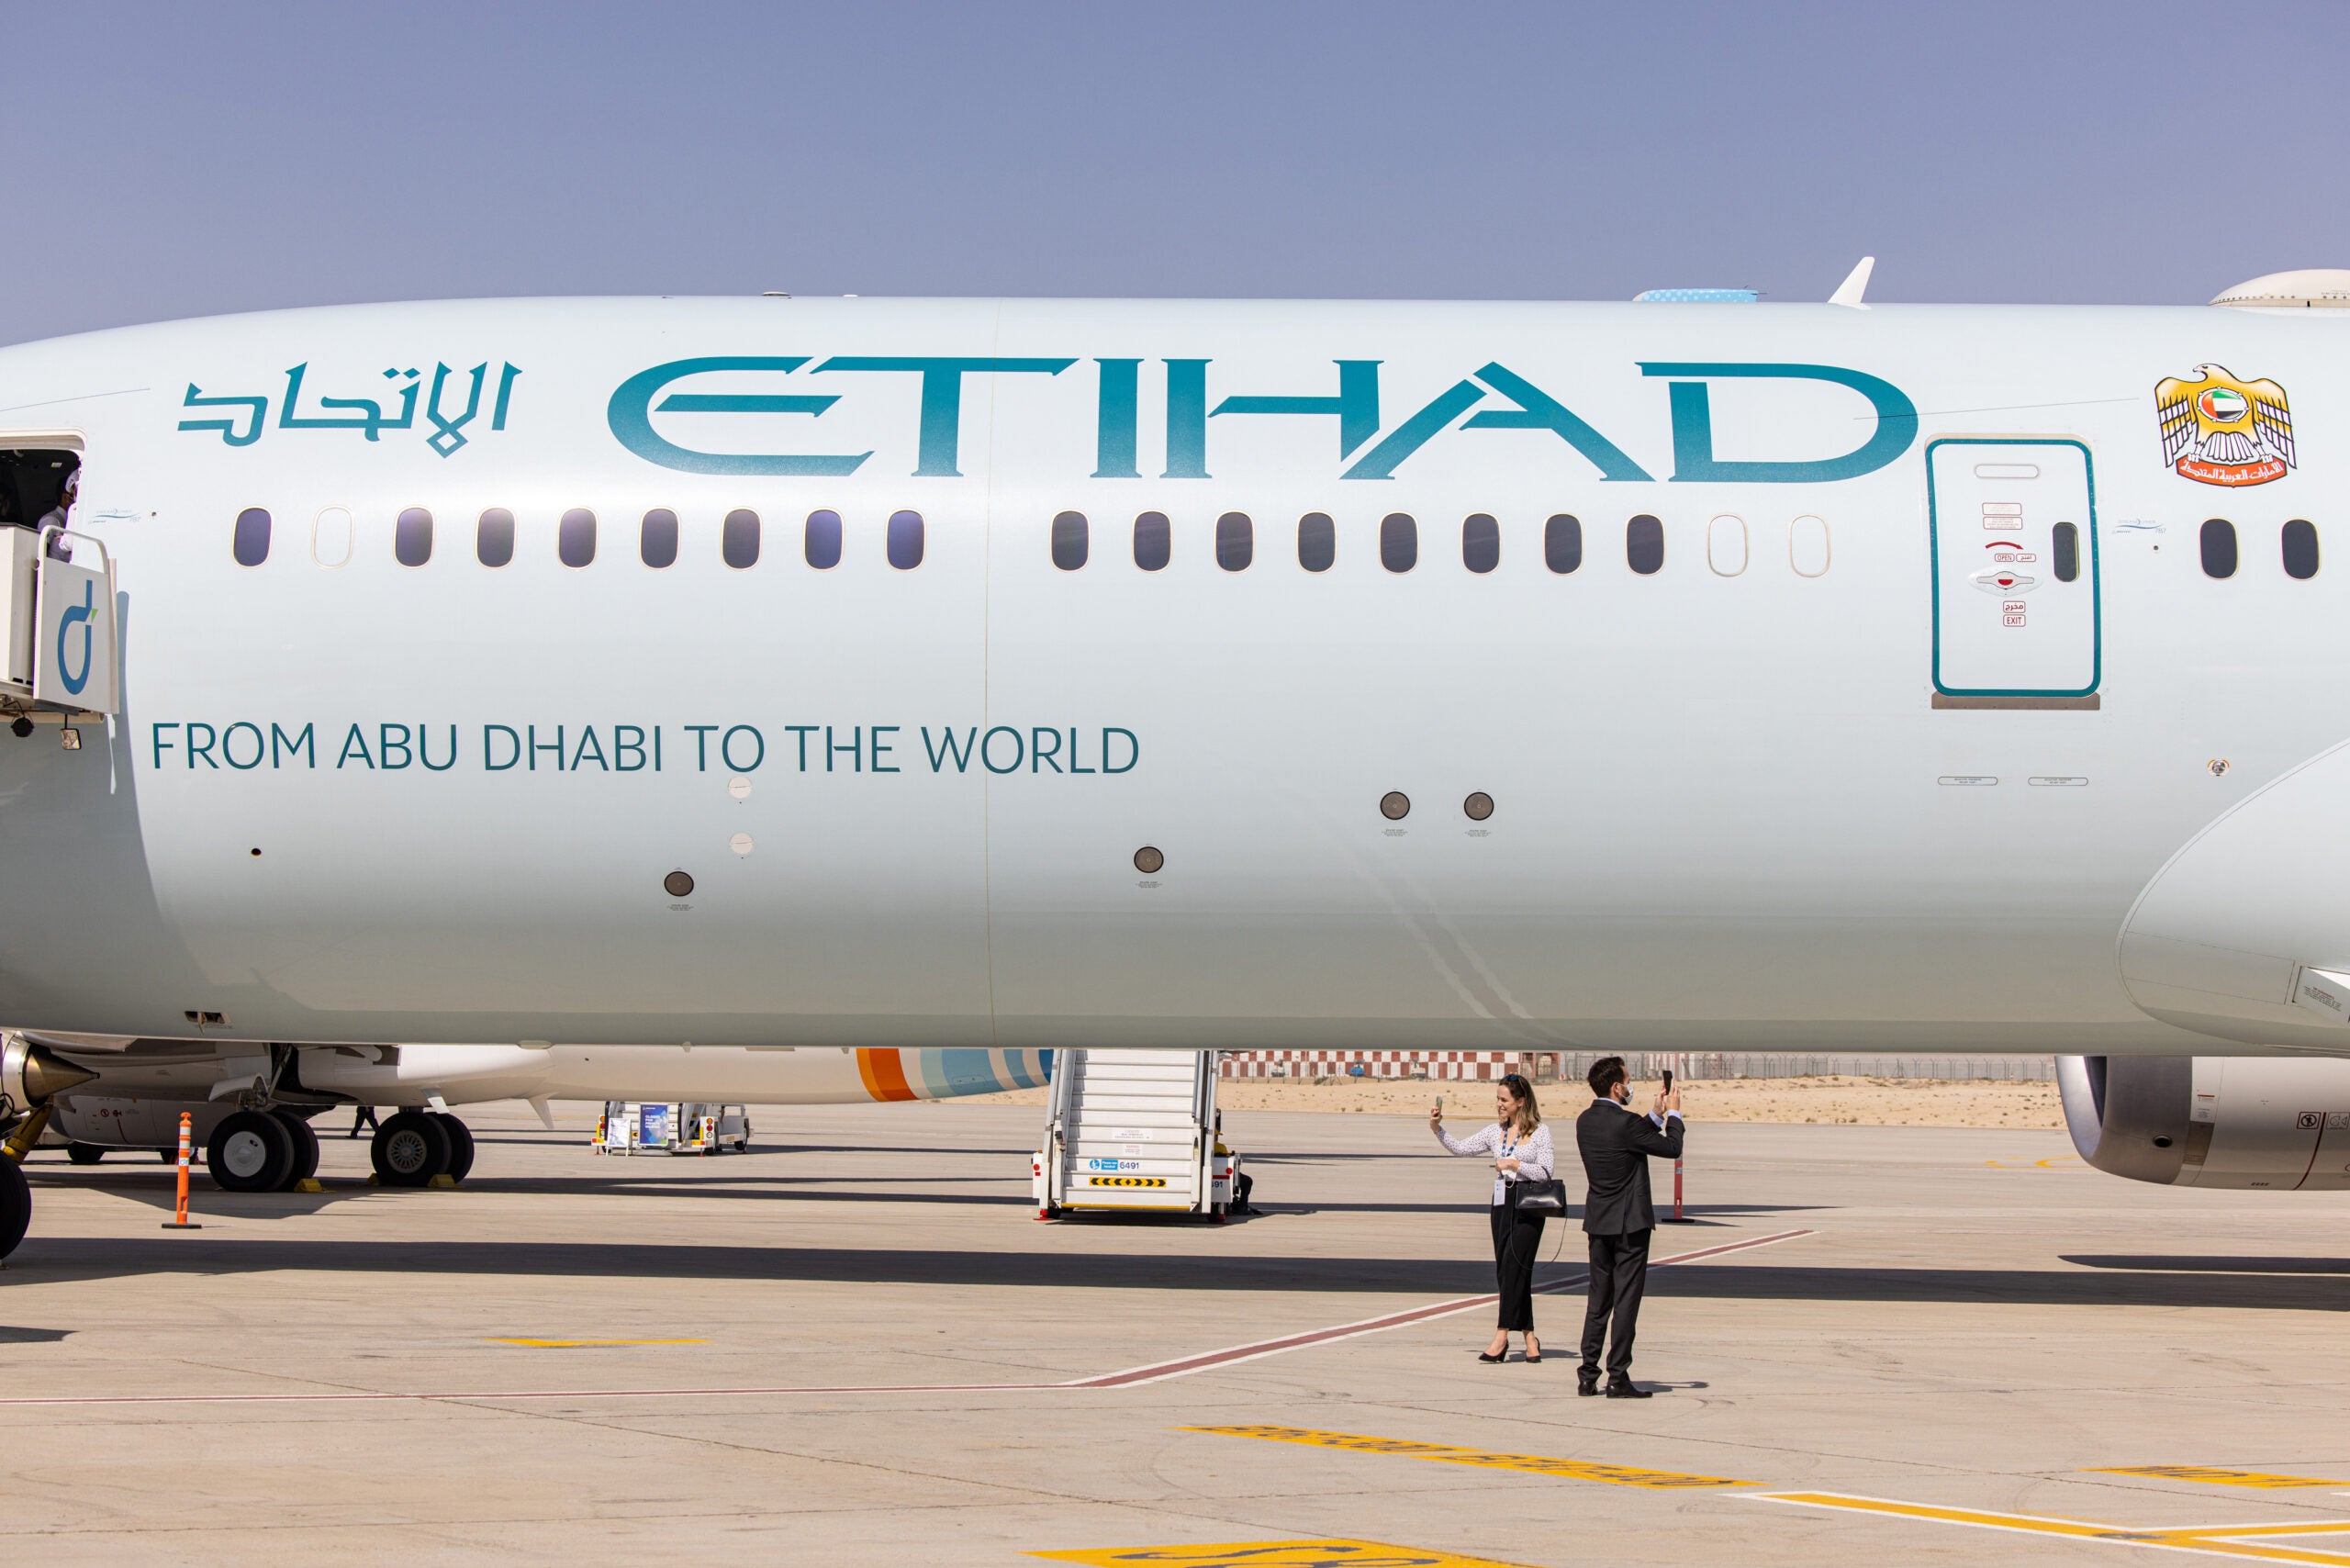 Earn up to 75,000 Etihad Guest miles with Avis promotion this weekend